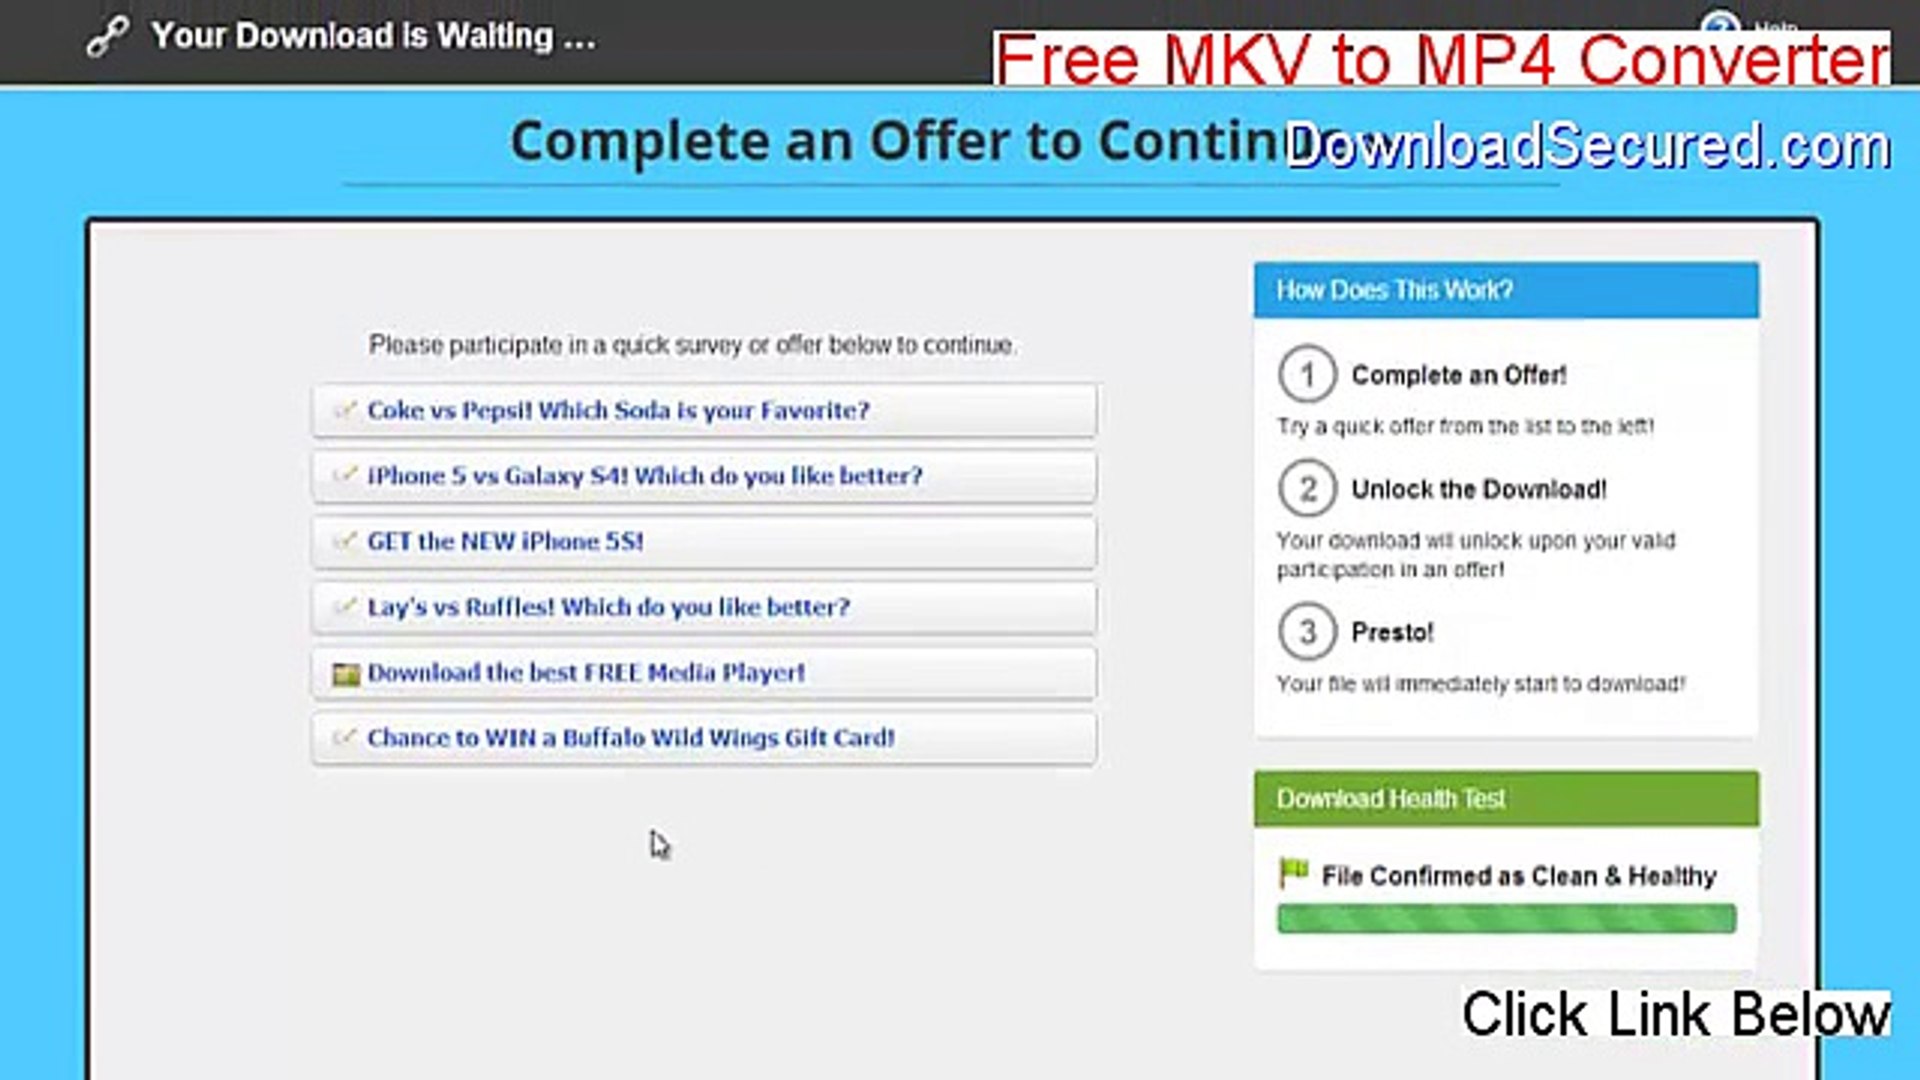 Free MKV to MP4 Converter Cracked - free mkv to mp4 converter for windows  2015 - video Dailymotion